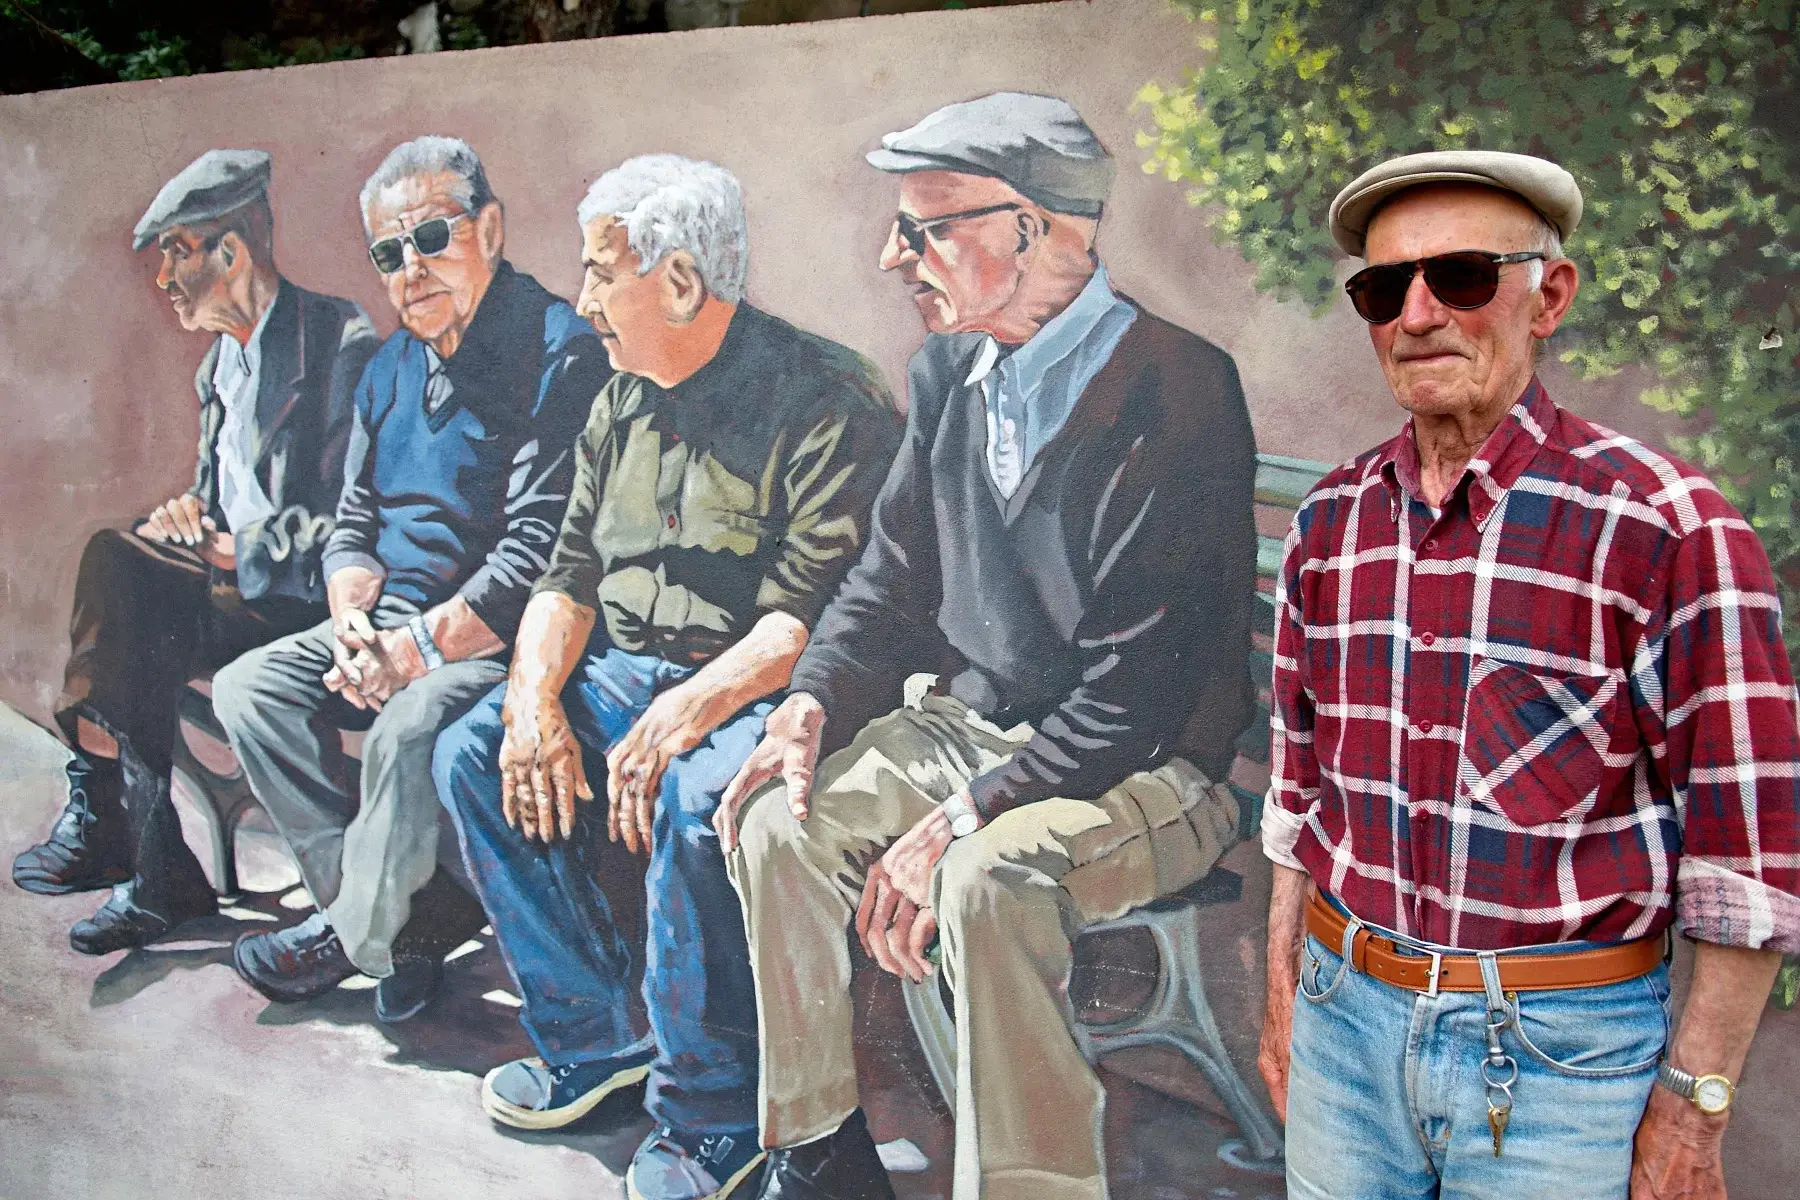 A senior citizen standing next to a mural of pensioners in Tinnura, Sardinia